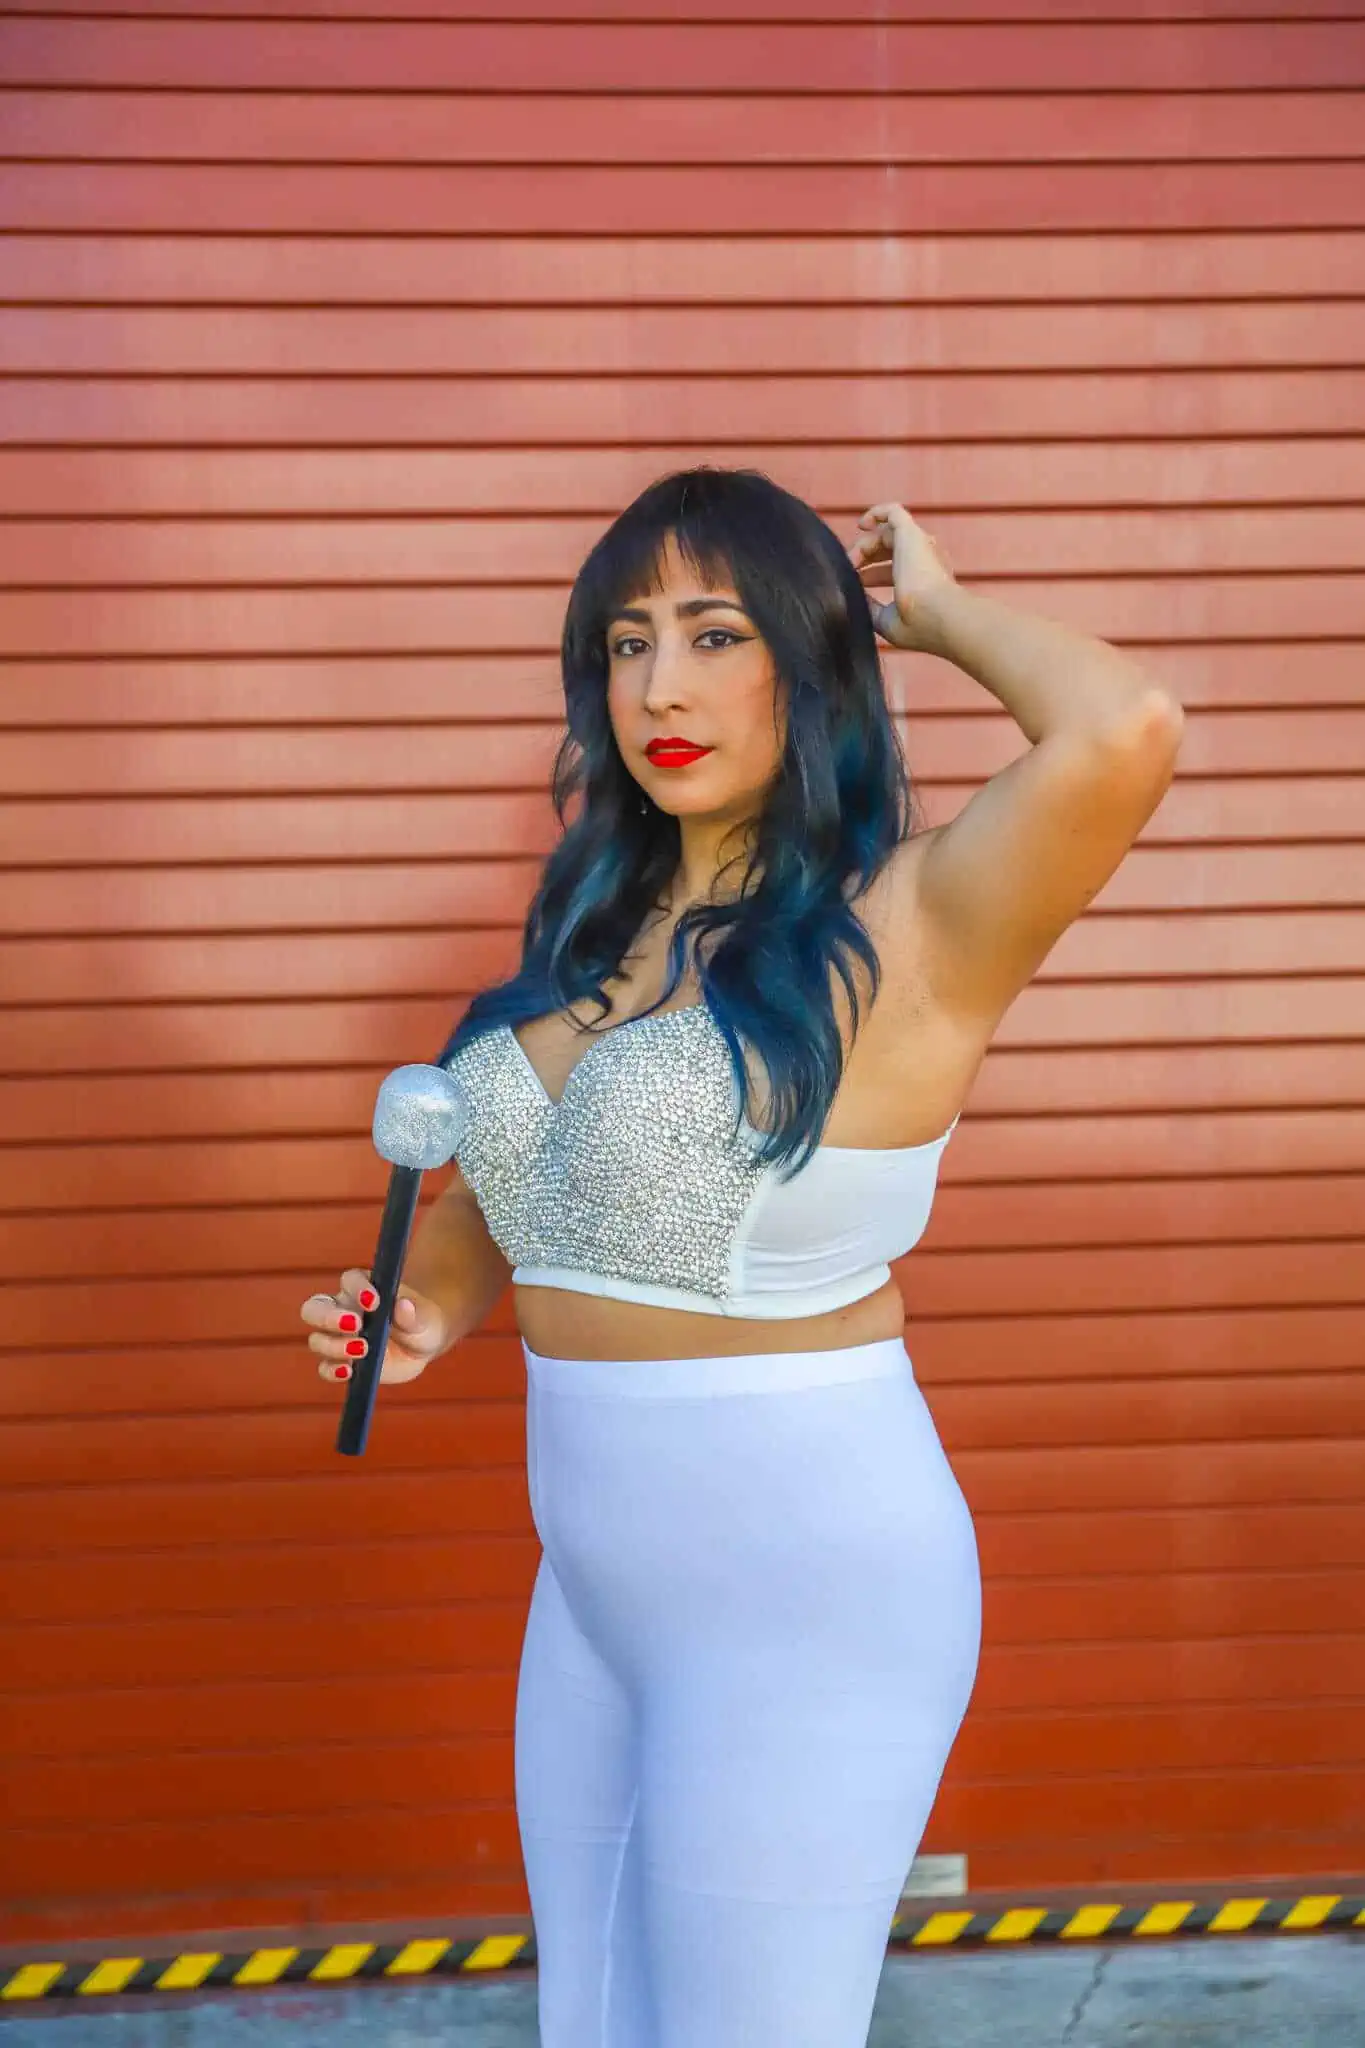 DIY Selena Quintanilla Costume with Thrift Store Items